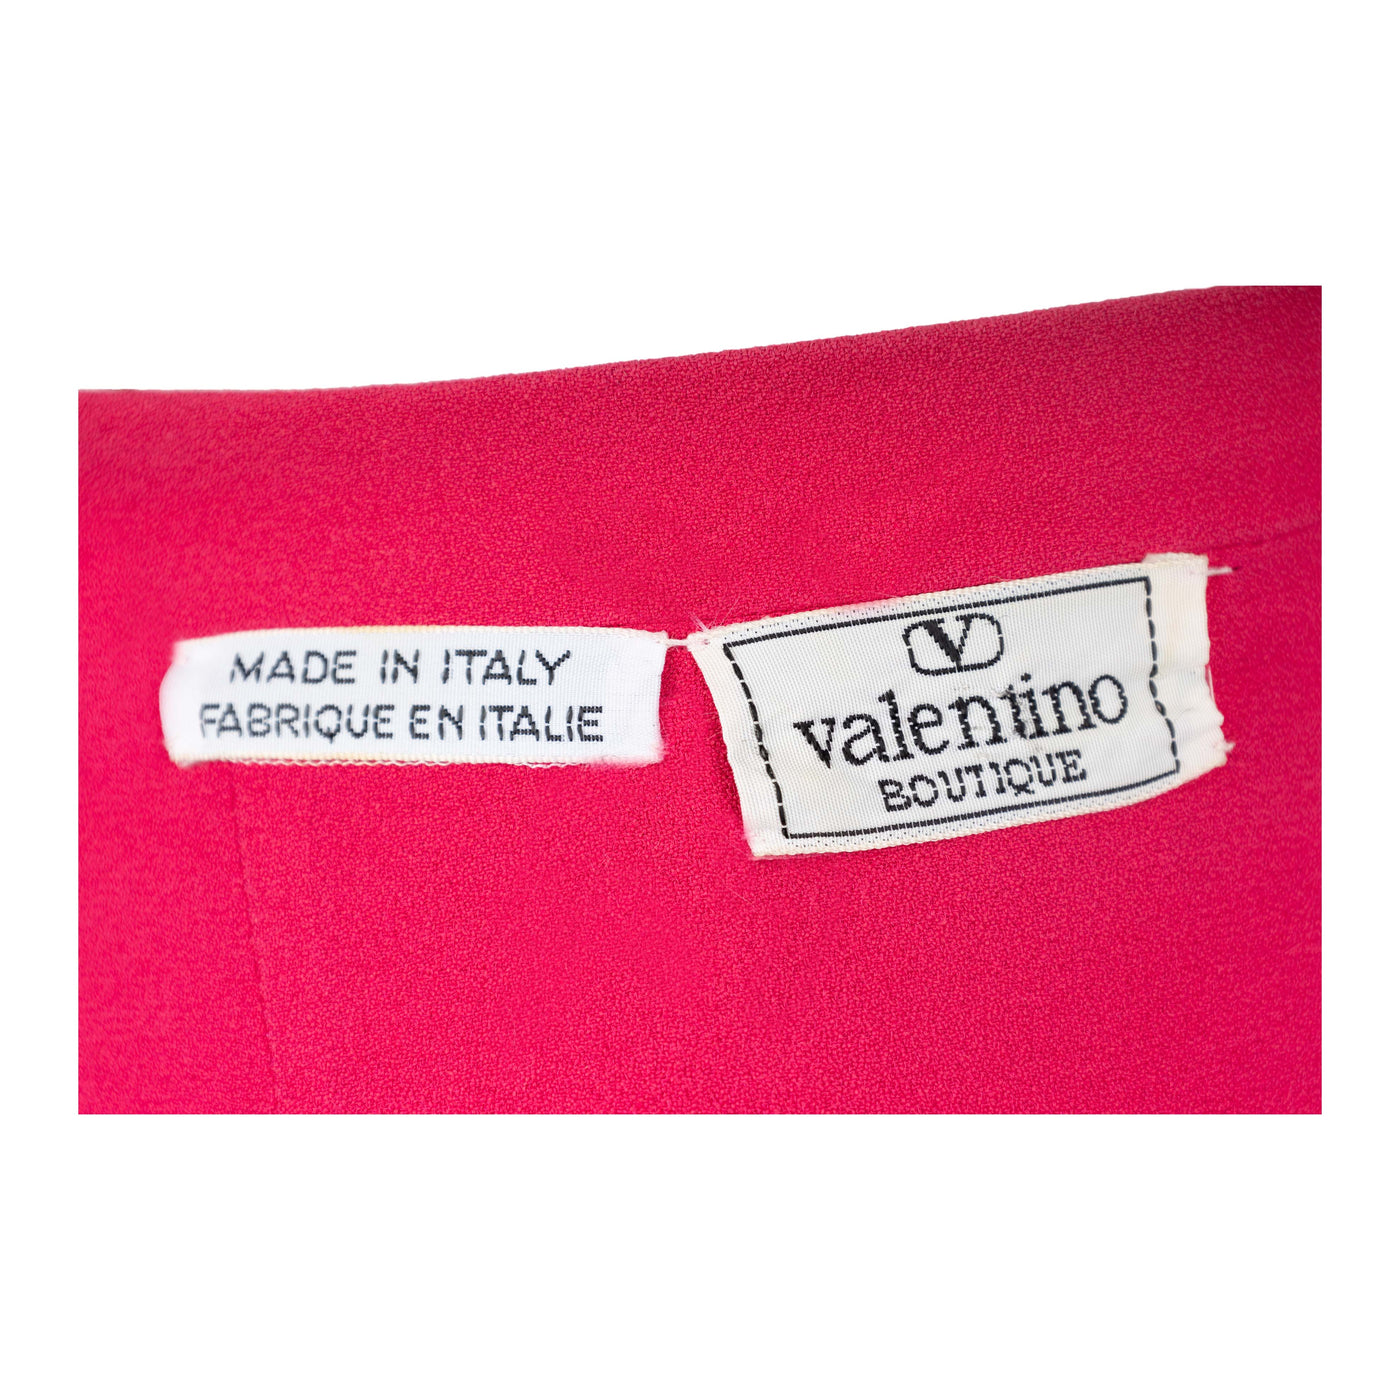 Secondhand Valentino Pink Pleated Skirt